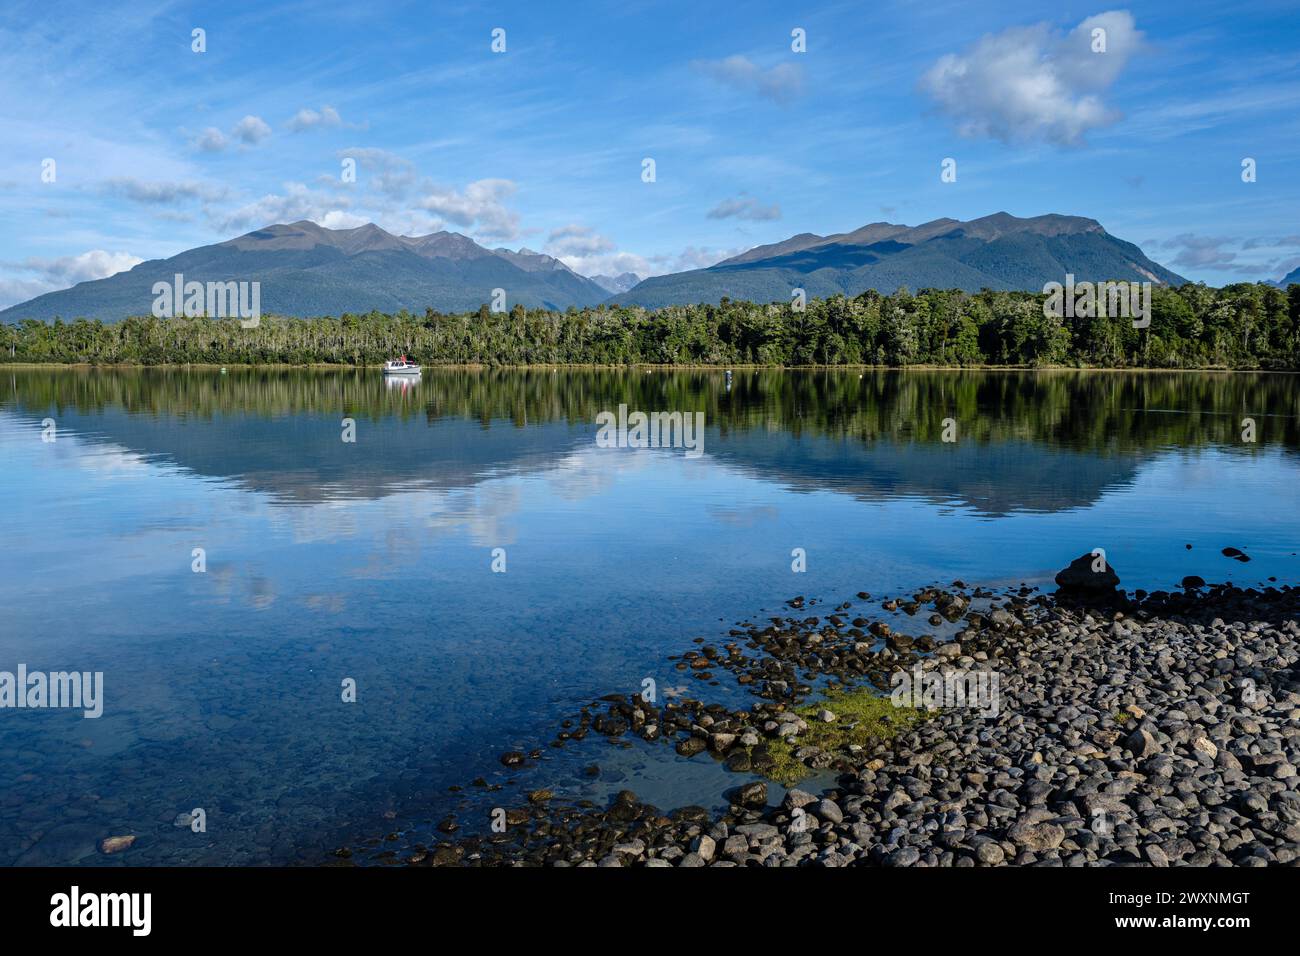 Early morning view of the Murchison Mountains and Lake Te Anau from Te Anau Downs, Fiordland National Park, Southland, South Island, New Zealand Stock Photo